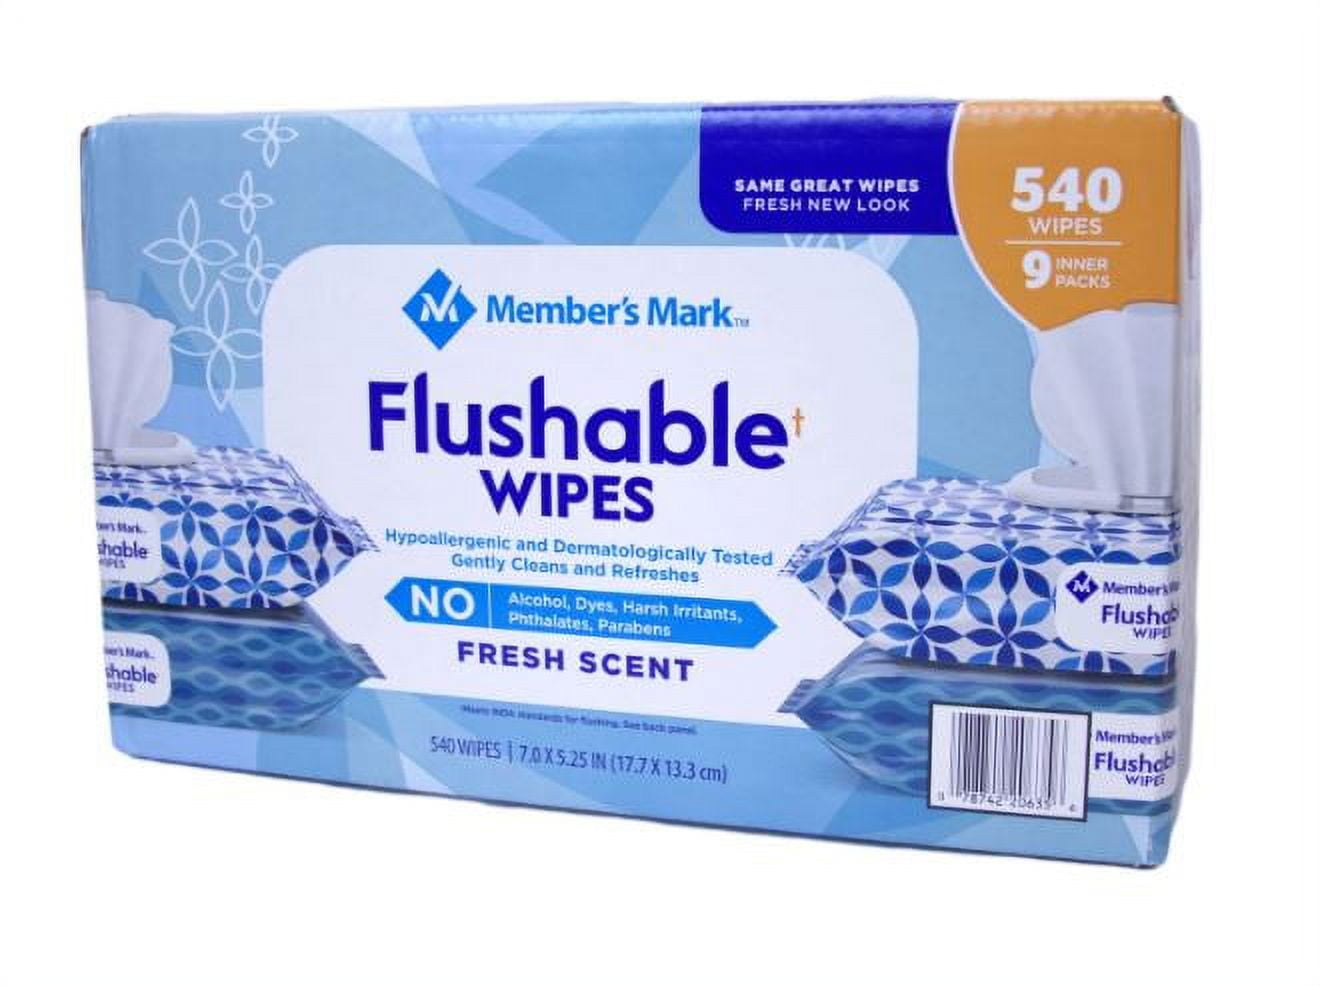 Equate Coconut Scented Flushable Wipe, 2 Flip-Top Packs (96 Total Wipes)